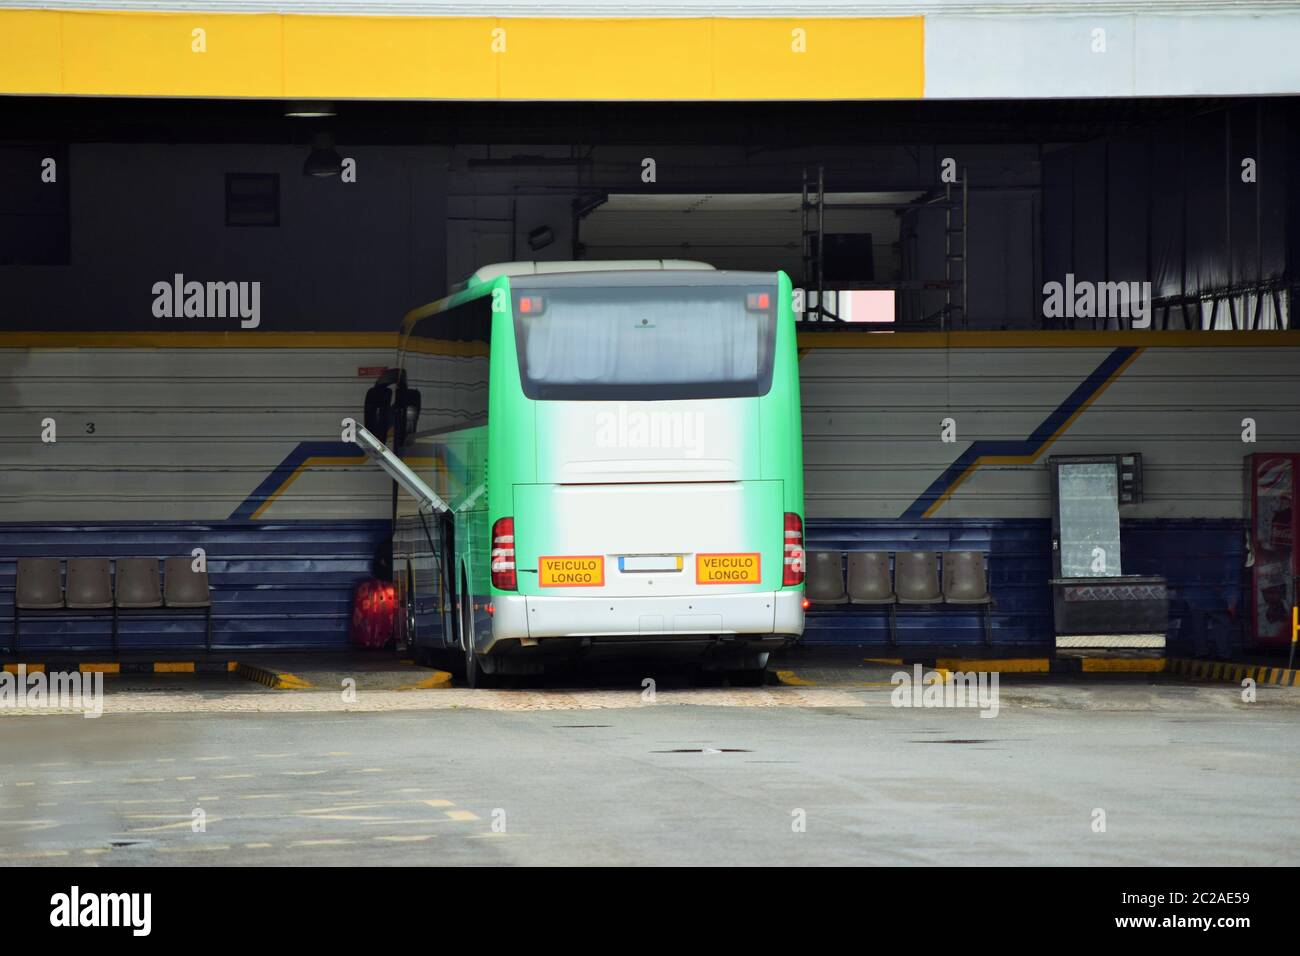 Green and white bus in an open bus station on platform two Stock Photo